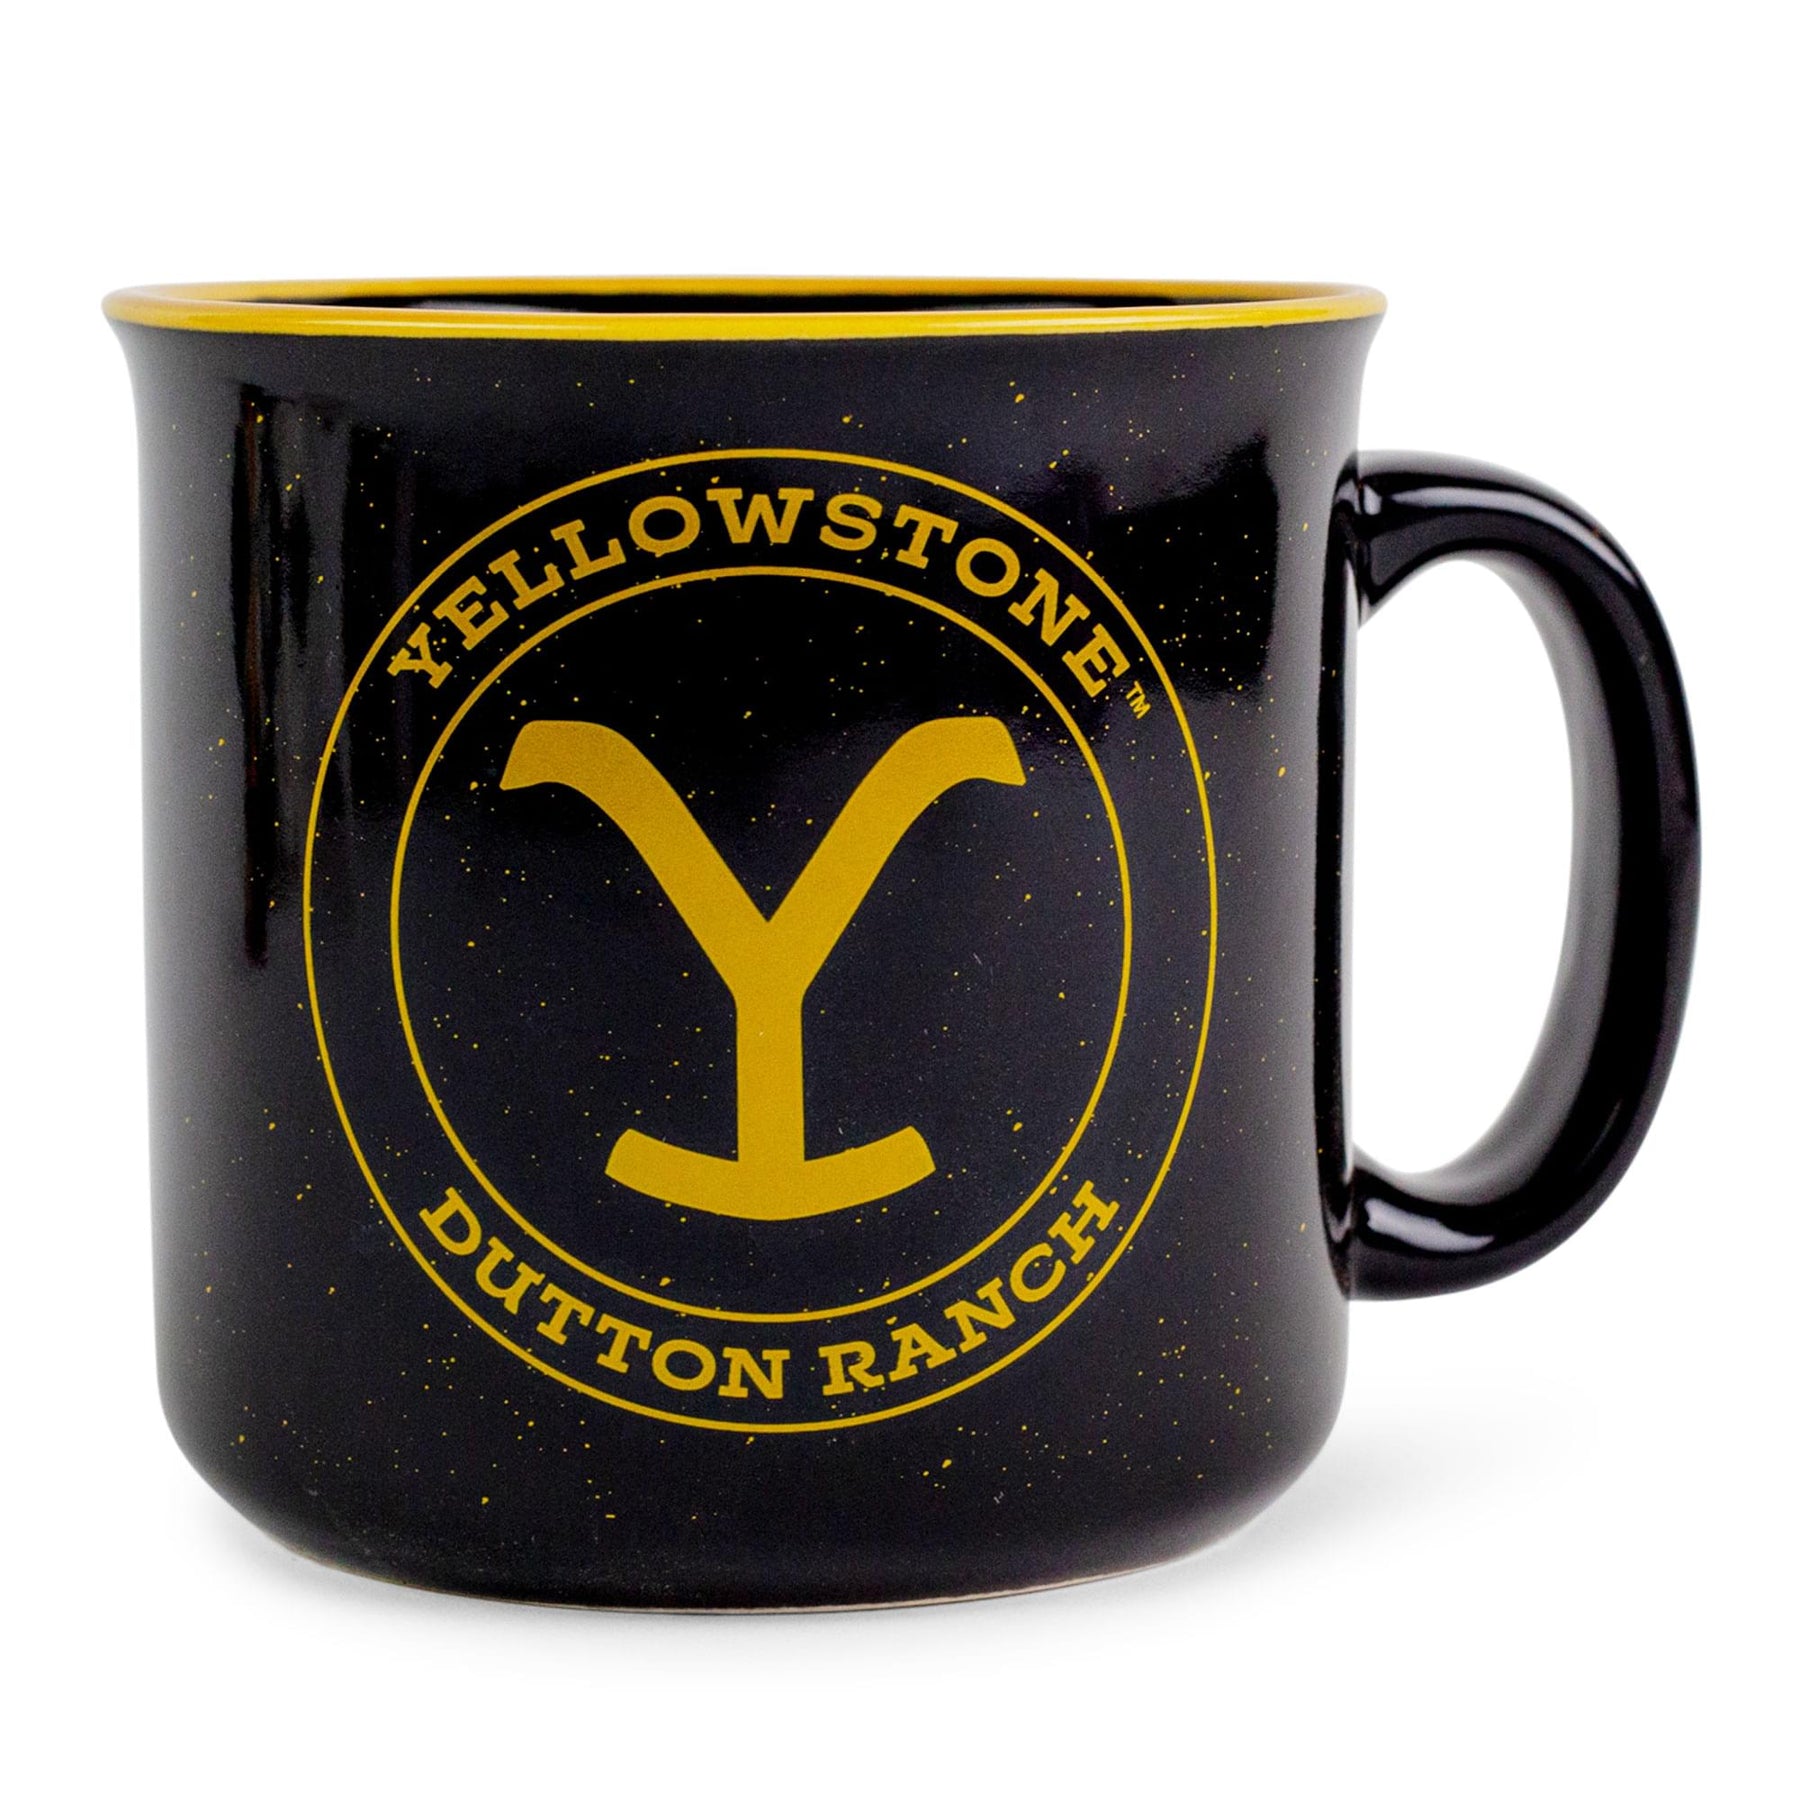 Yellowstone Dutton Ranch Ceramic Camper Mug | Holds 20 Ounces